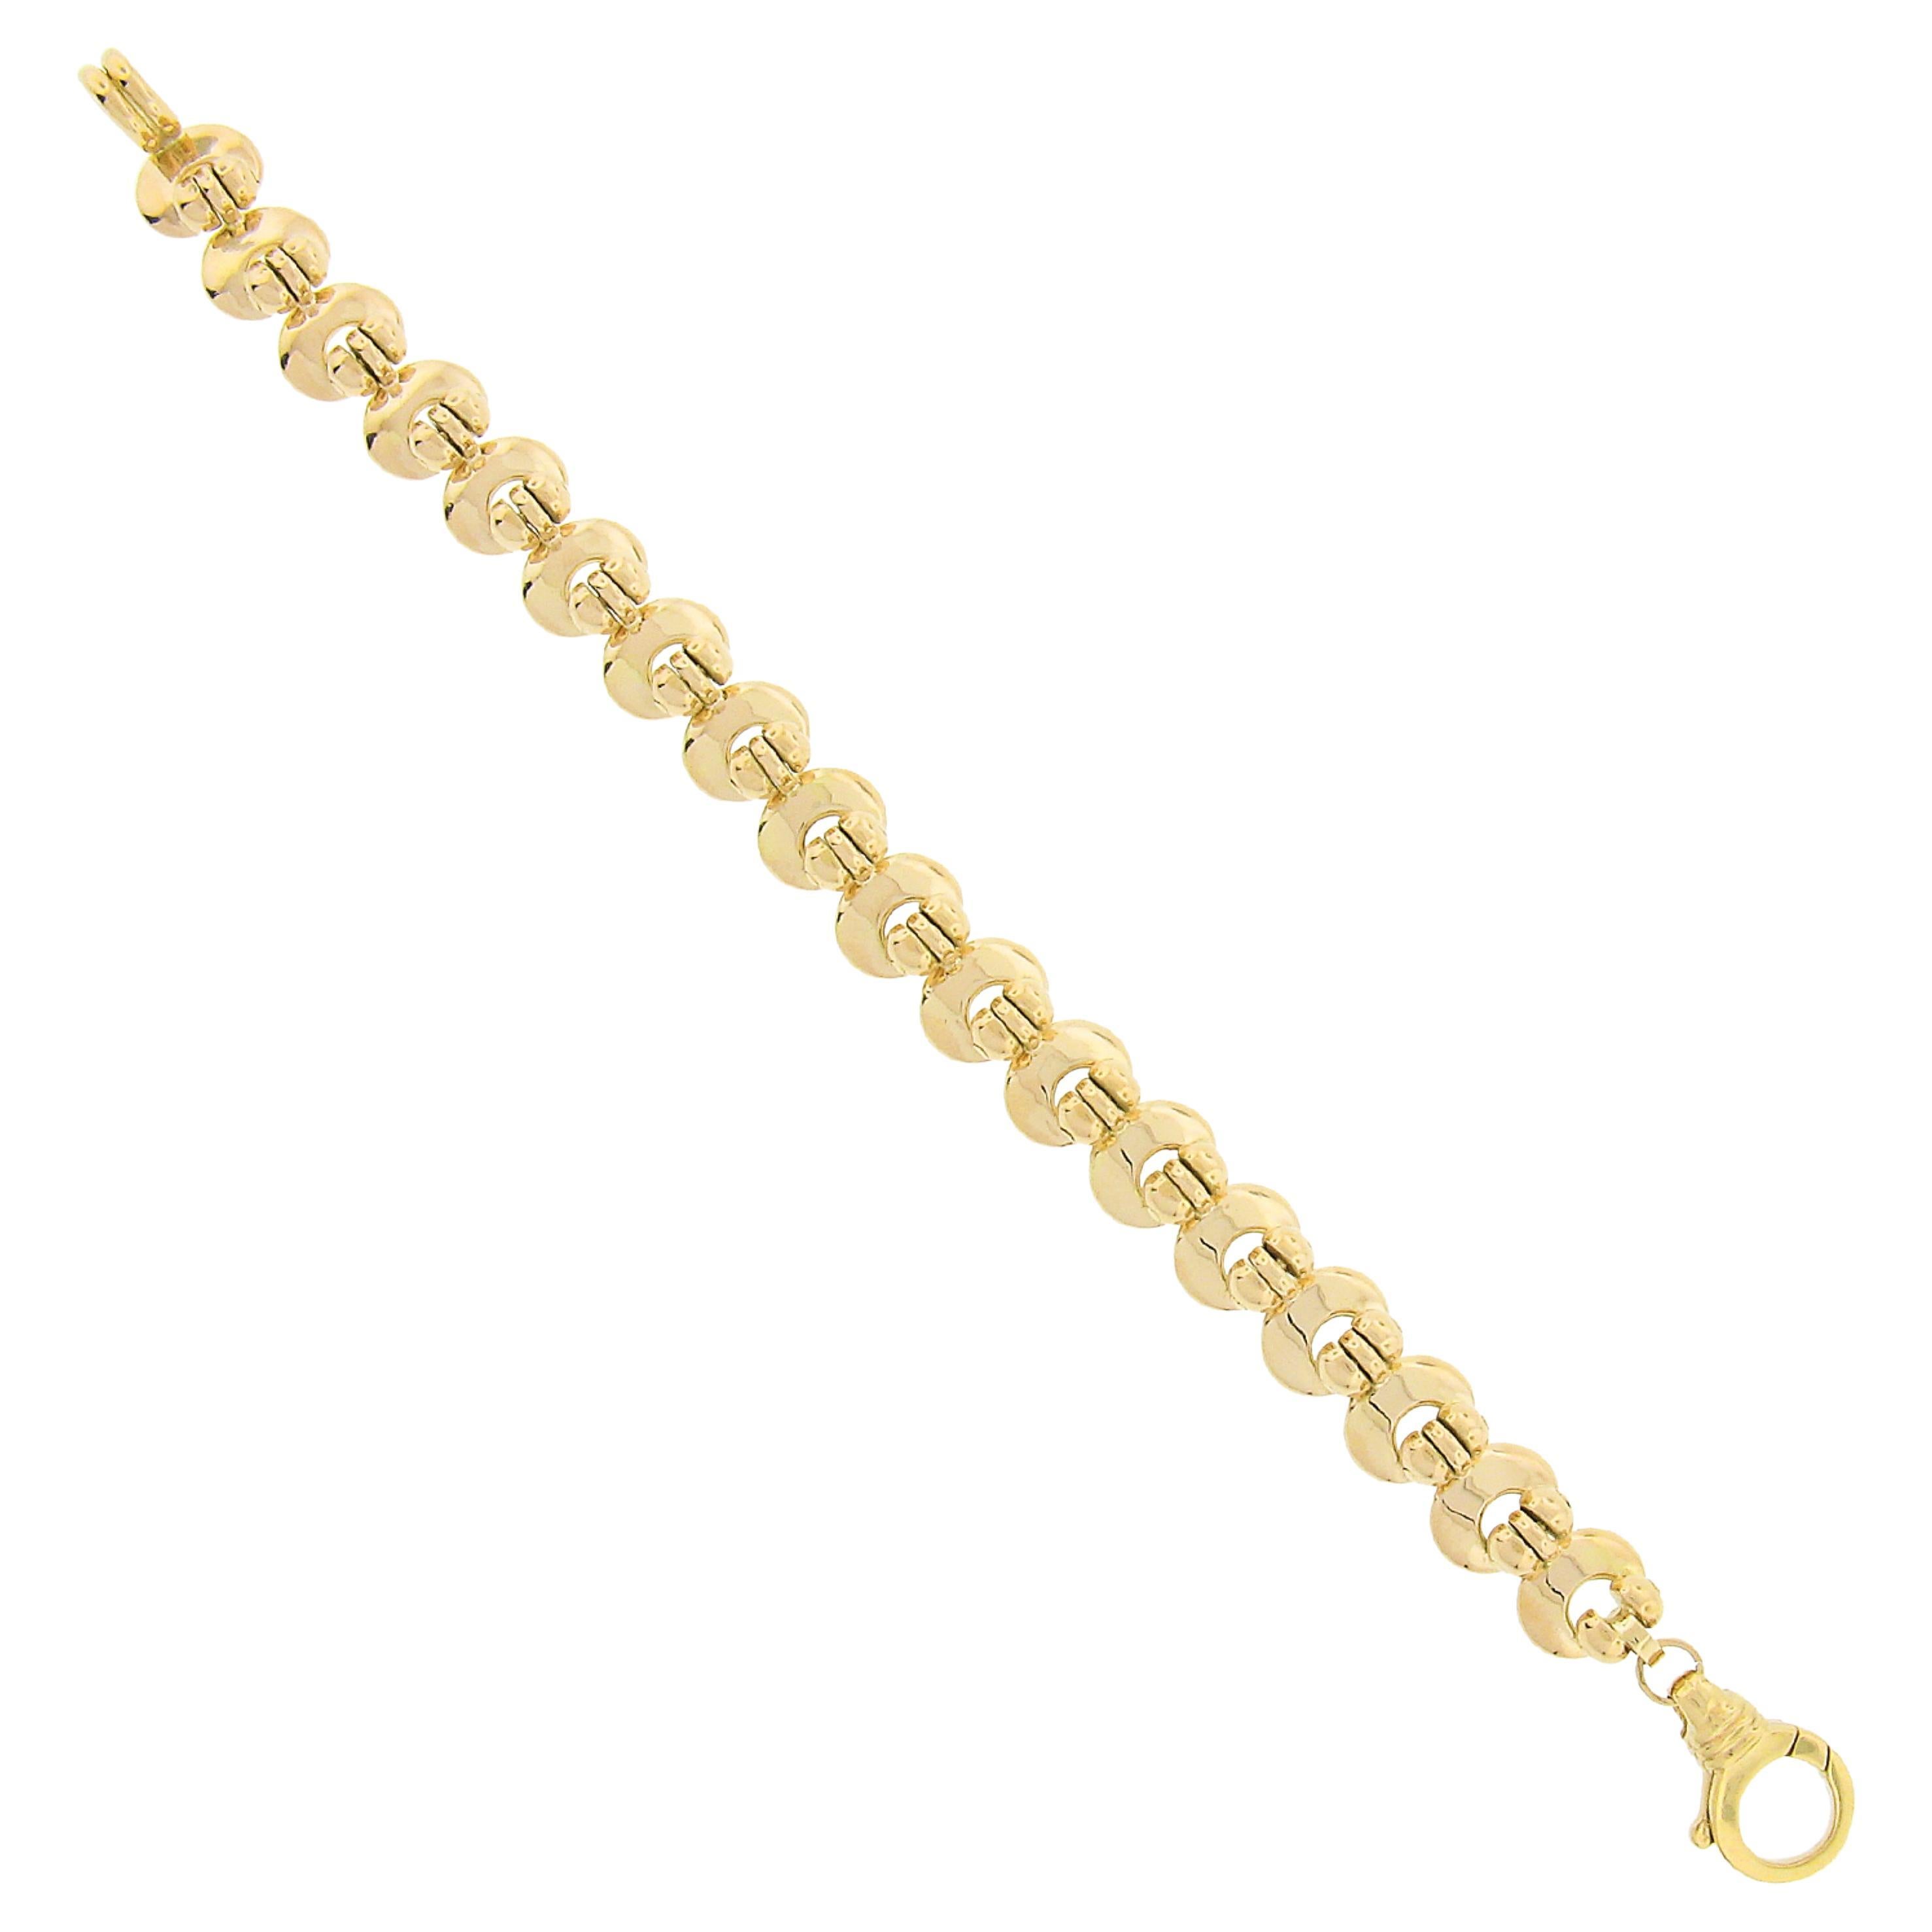 Fancy Handmade 18K Yellow Gold 6.5" Unique Polished Hinged Link Chain Bracelet